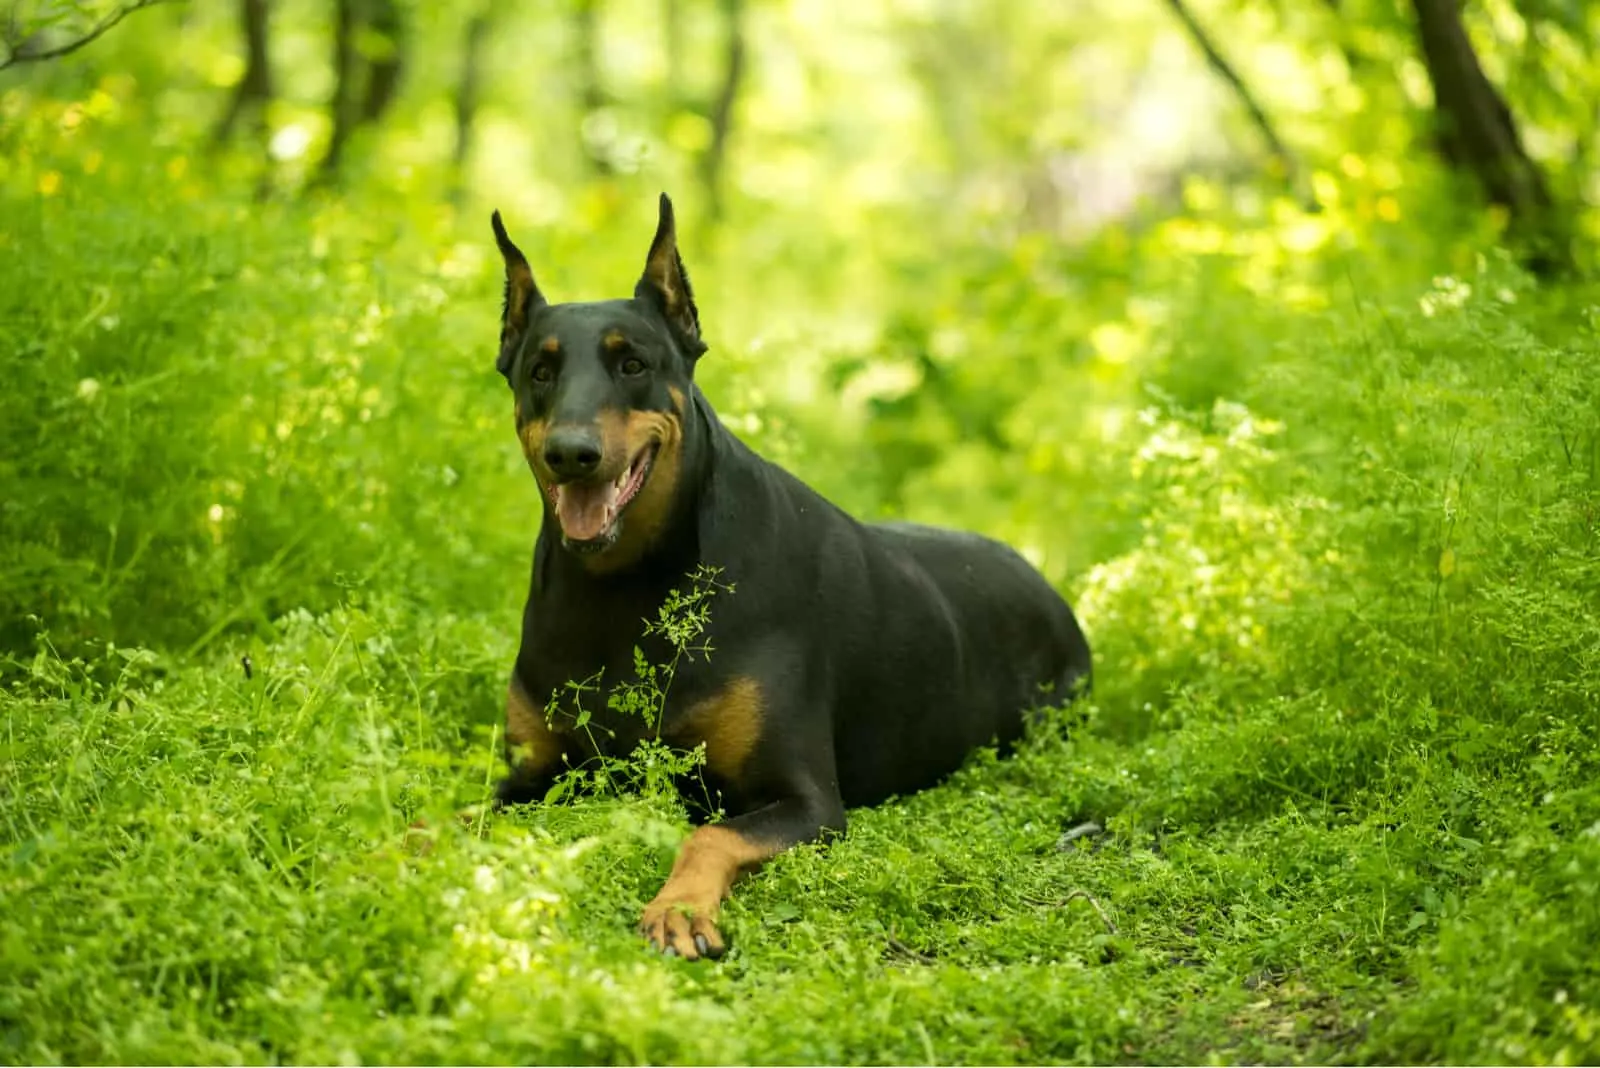 Doberman lies on the grass in the forest